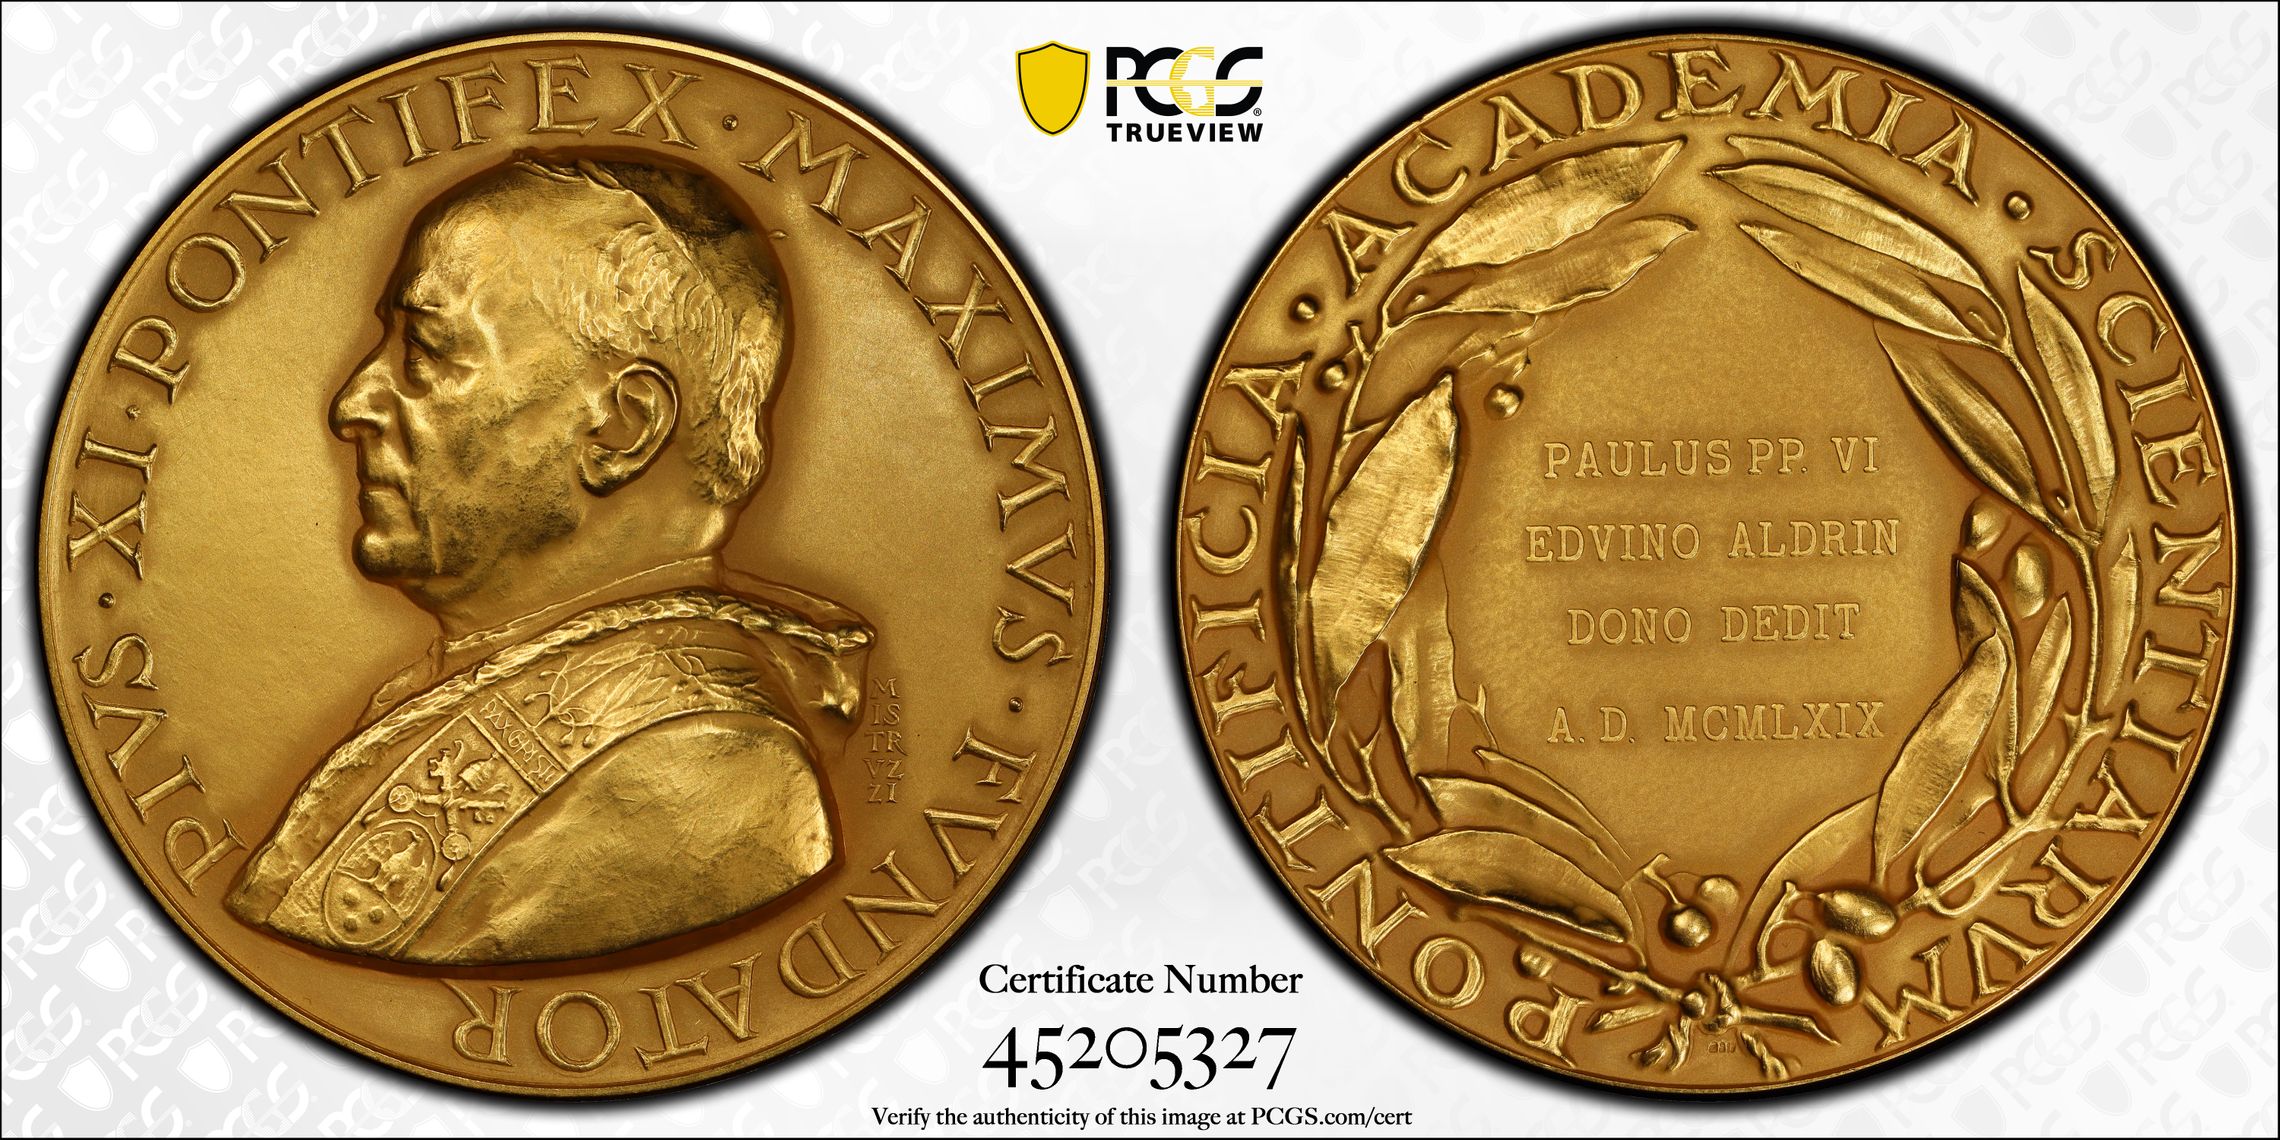 G084 G084 unique 1969 Vatican gold medal from Pope Paul VI to Ed